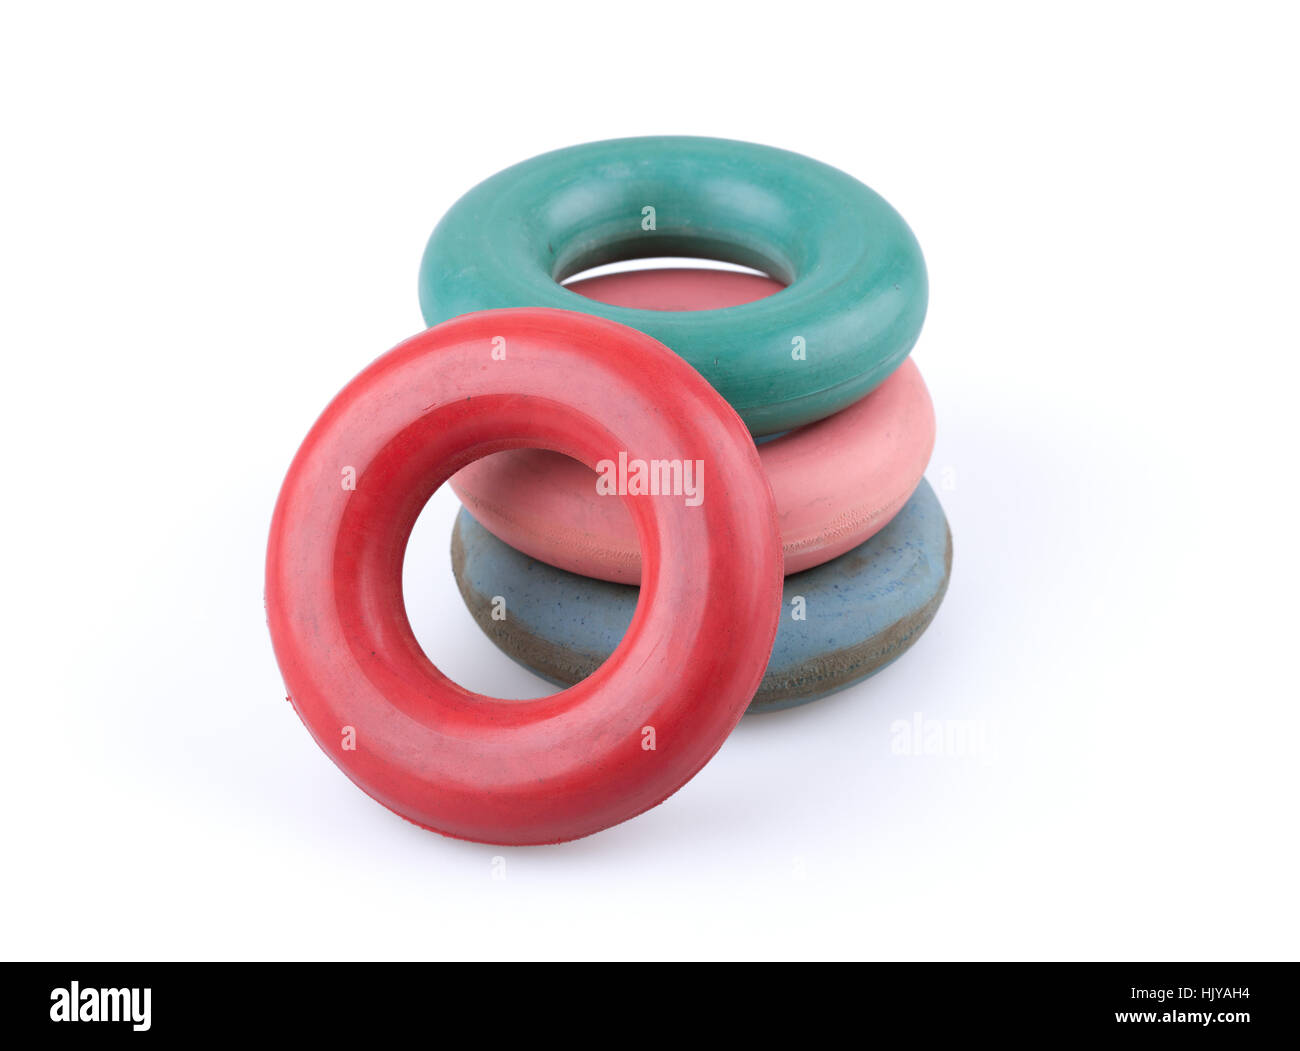 hand, ring, sport, sports, rings, exercise, trainer, rubber, exercising  Stock Photo - Alamy